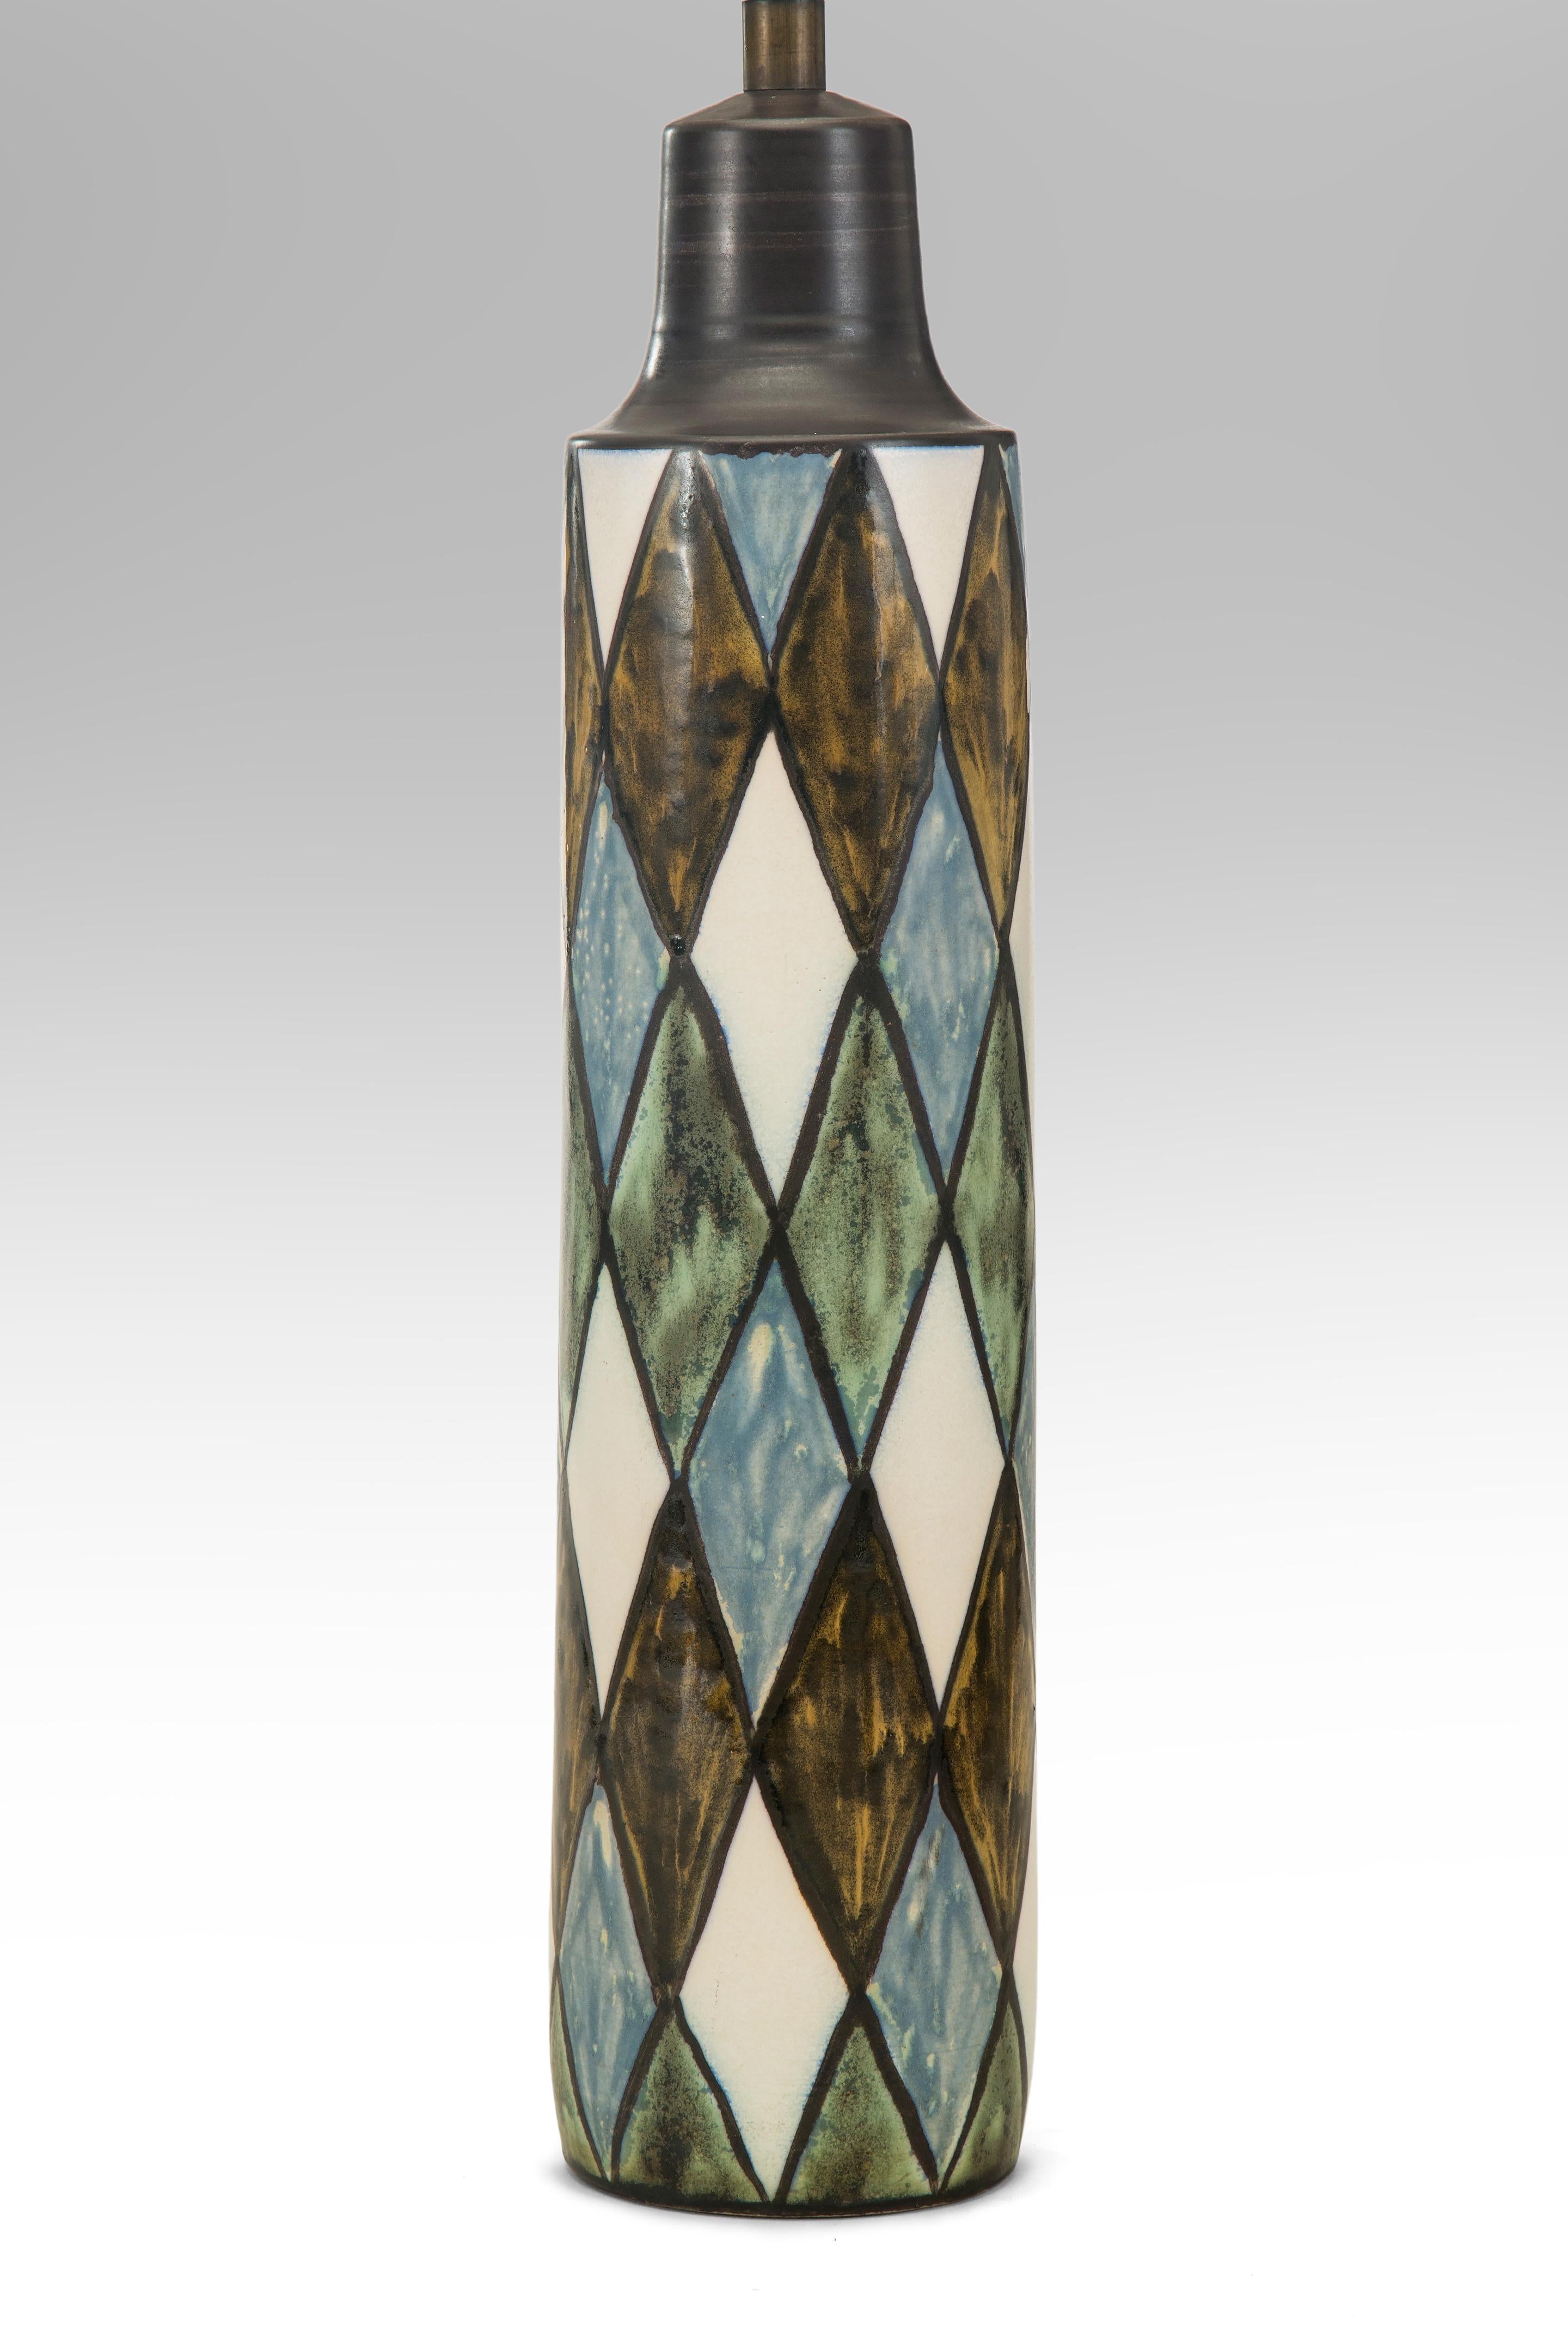 Studio Pottery Lamp, Signed Lotte
Mid-20th century
The harlequin pattern has endured because it is an expression of both sophistication and joy. The columnar lamp glazed in a striking harlequin design of blue, green, brown and white. This is a